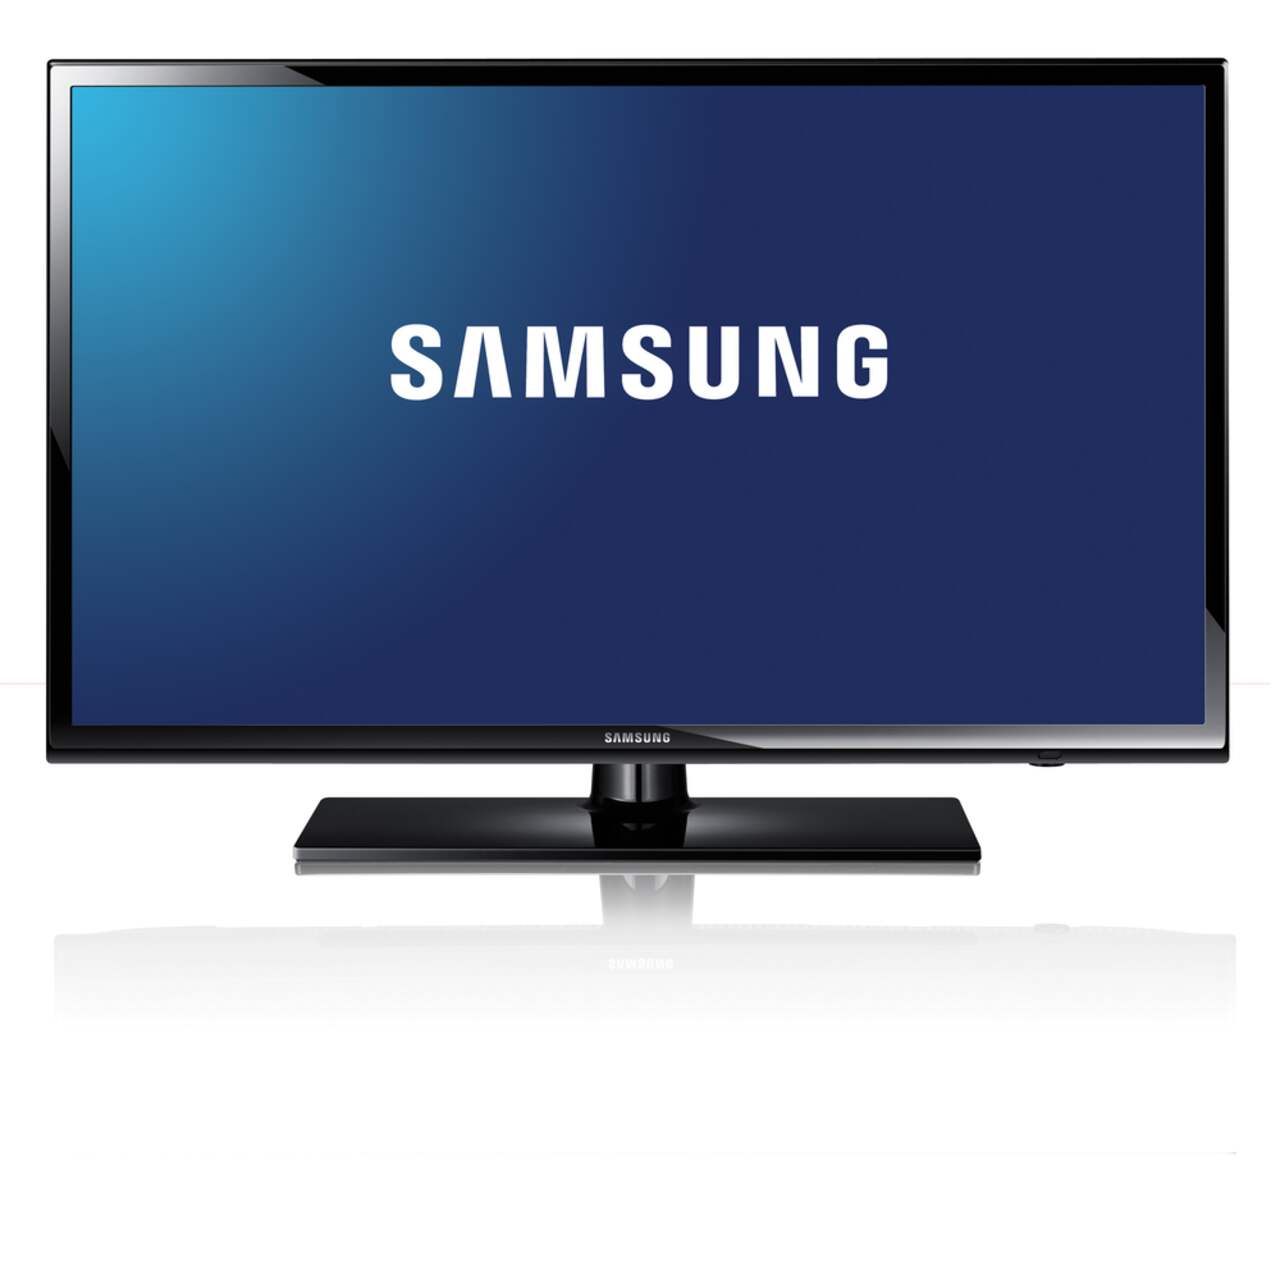 How To Set Up Voice Recognition On Samsung Smart TV